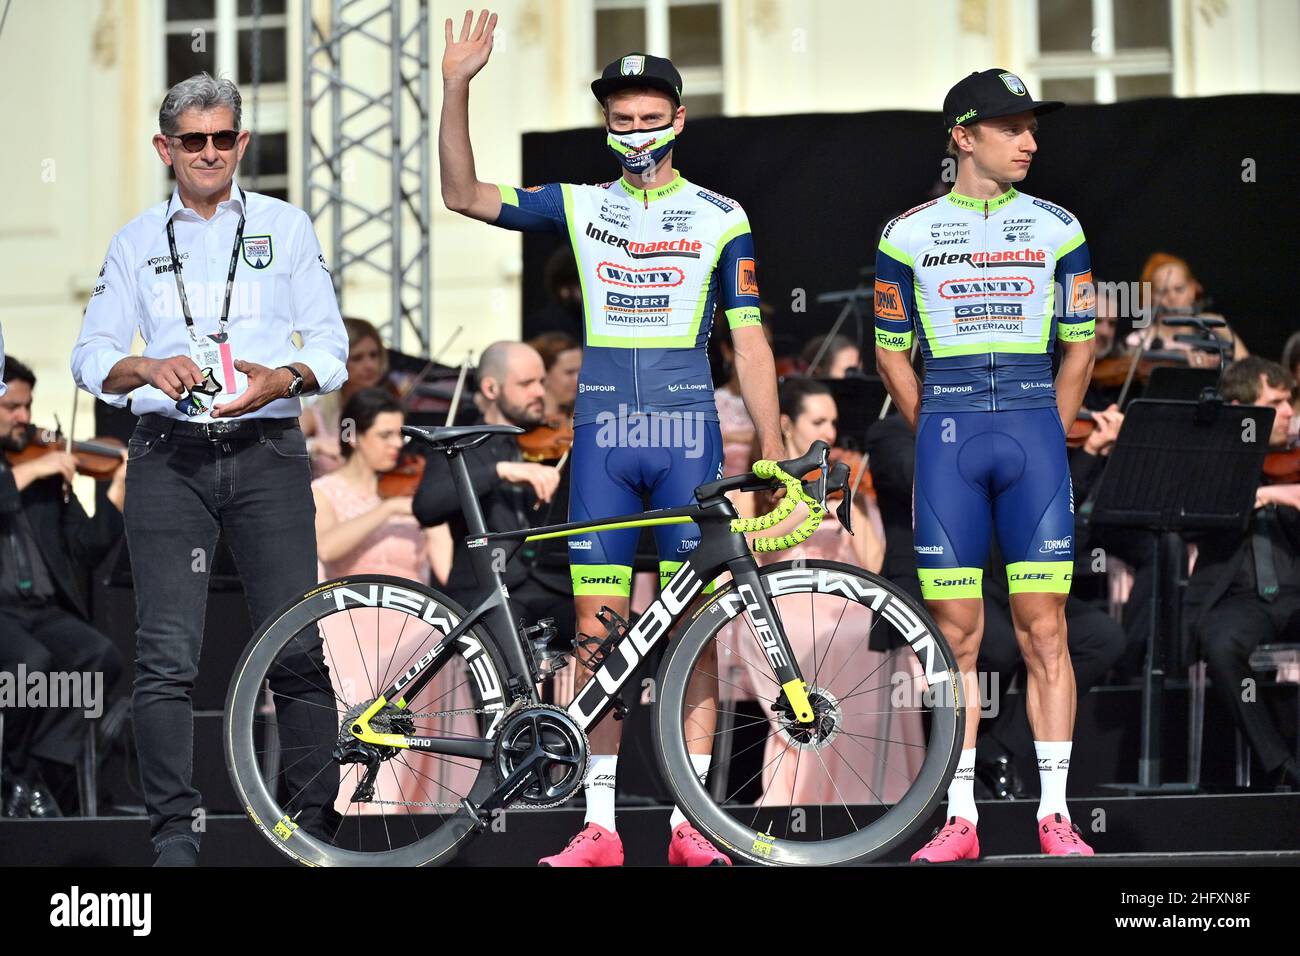 Massimo Paolone/LaPresse May 06, 2021 Torino (Italy) Sport Cycling Giro d'Italia 2021 - 104th edition - Team Presentation at Valentino Castle In the pic: INTERMARCHE - WANTY - GOBERT MATERIAUX Stock Photo